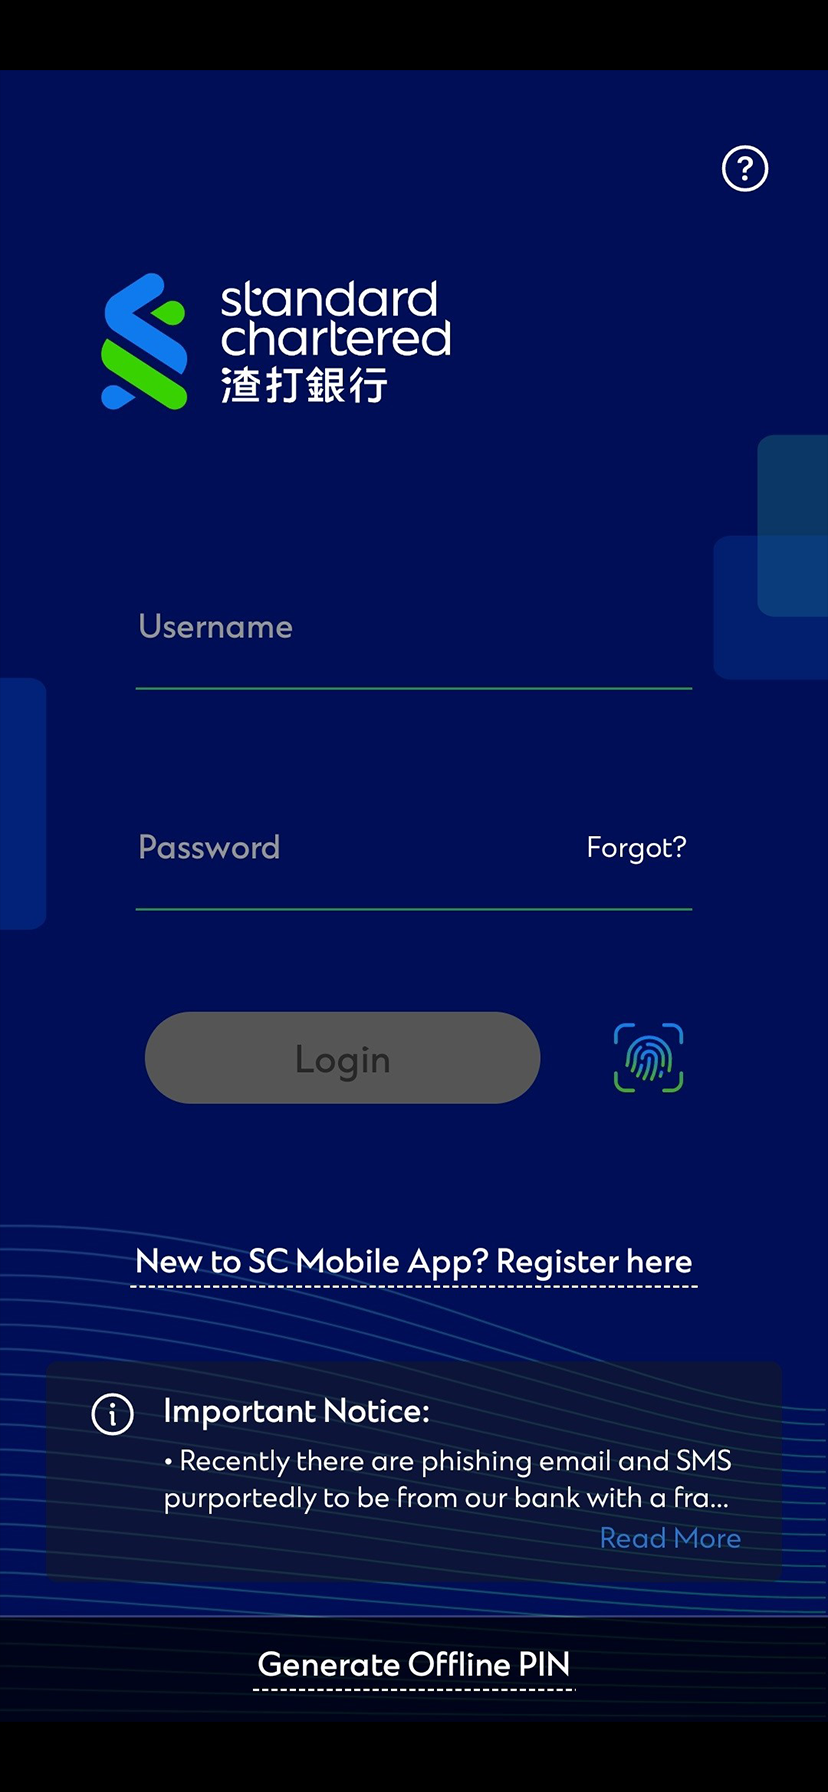 Generate offline PIN Add an extra layer of protection with SC Mobile Key Step 1